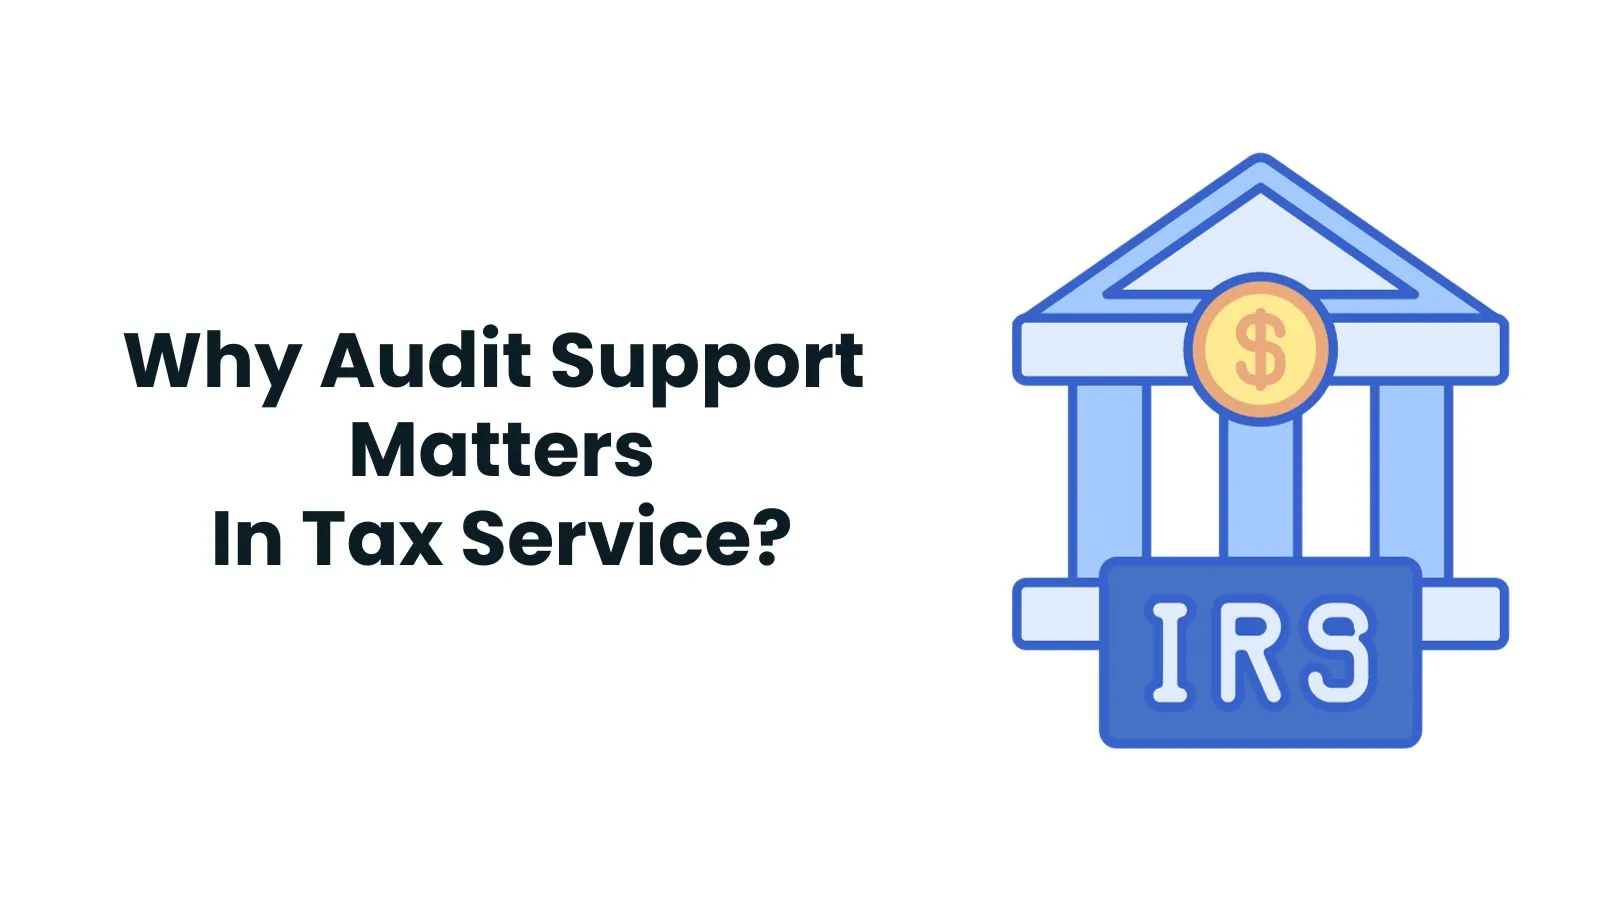 Why Audit Support Matters In Tax Service?